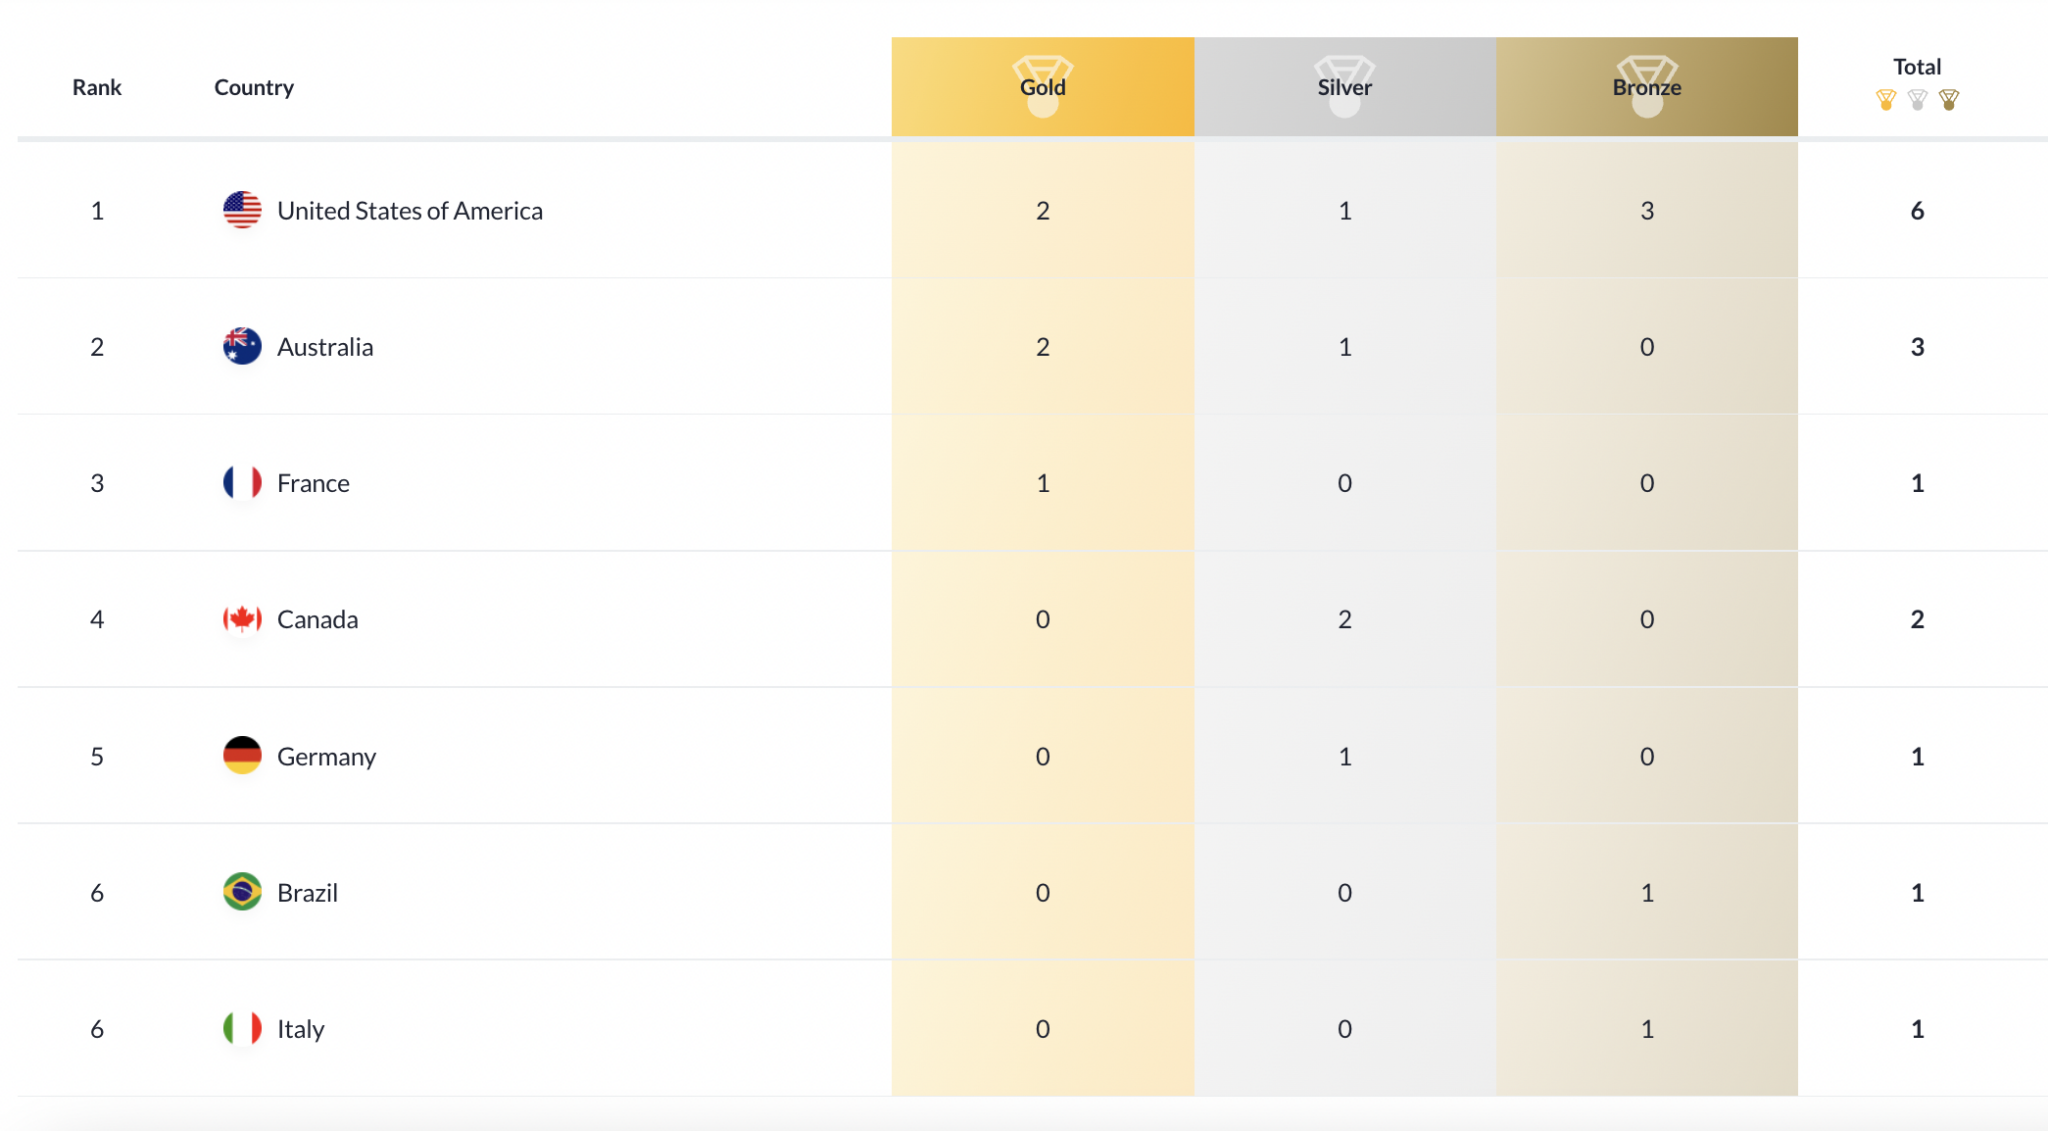 The United States Tops Medal Table After Day 1 In Budapest